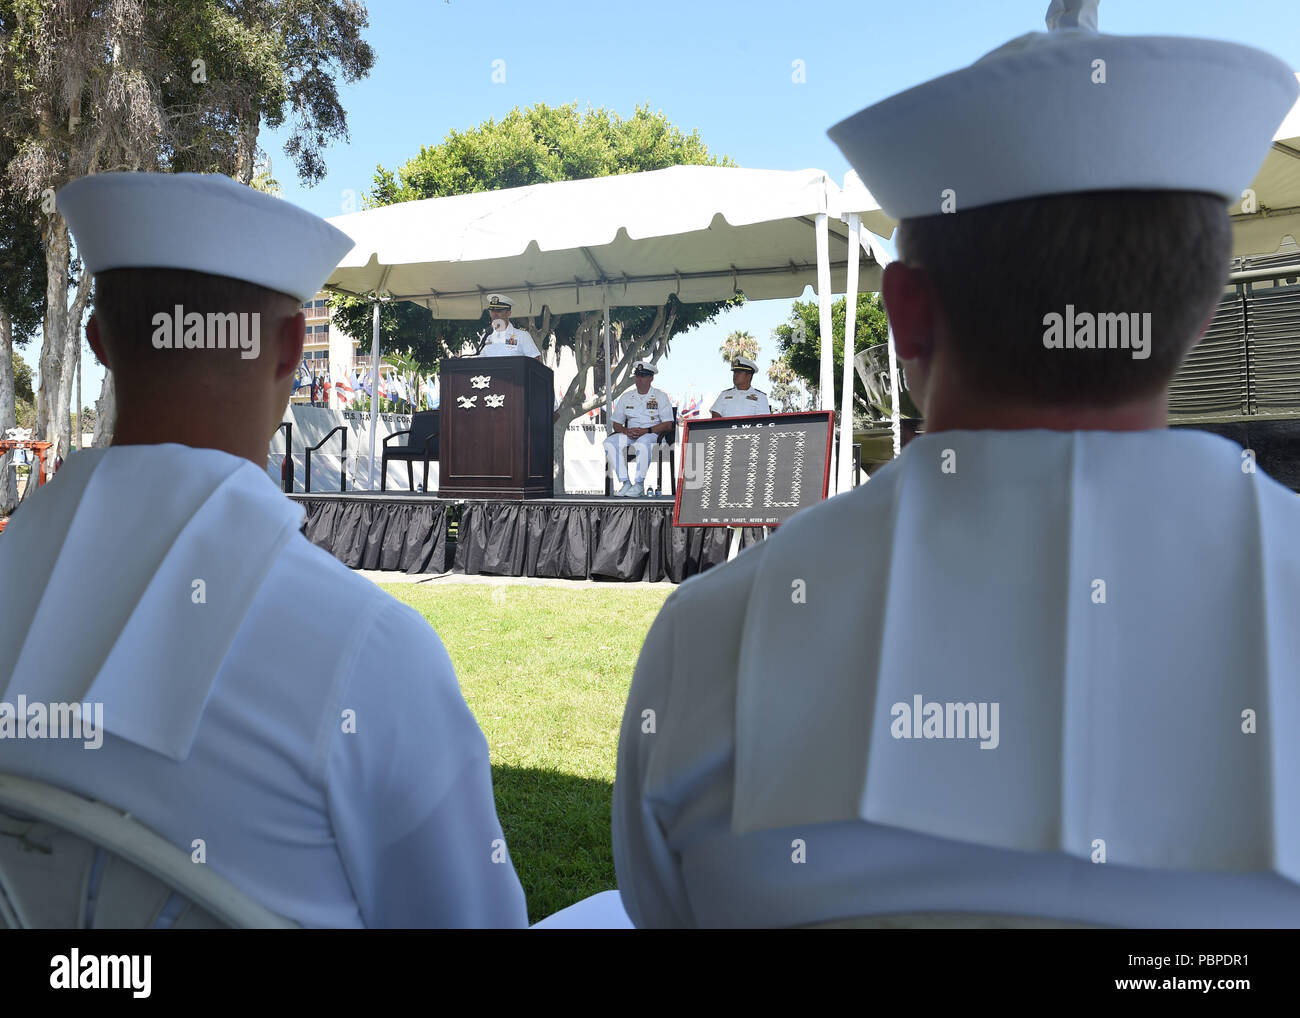 180719-N-OI558-0457 SAN DIEGO (July 19, 2018) - Cmdr. Matthew Russell, commanding officer of Special Boat Team (SBT) 20 delivers a speech to recent graduates of Special Warfare Combatant-Craft Crewman (SWCC) Class 100. Following a 37-week training course, these students will now join various Naval Special Warfare commands to begin their careers as special operations craft operators. (U.S. Navy photo by Mass Communication Specialist 3rd Class Chanel Turner/Released) Stock Photo